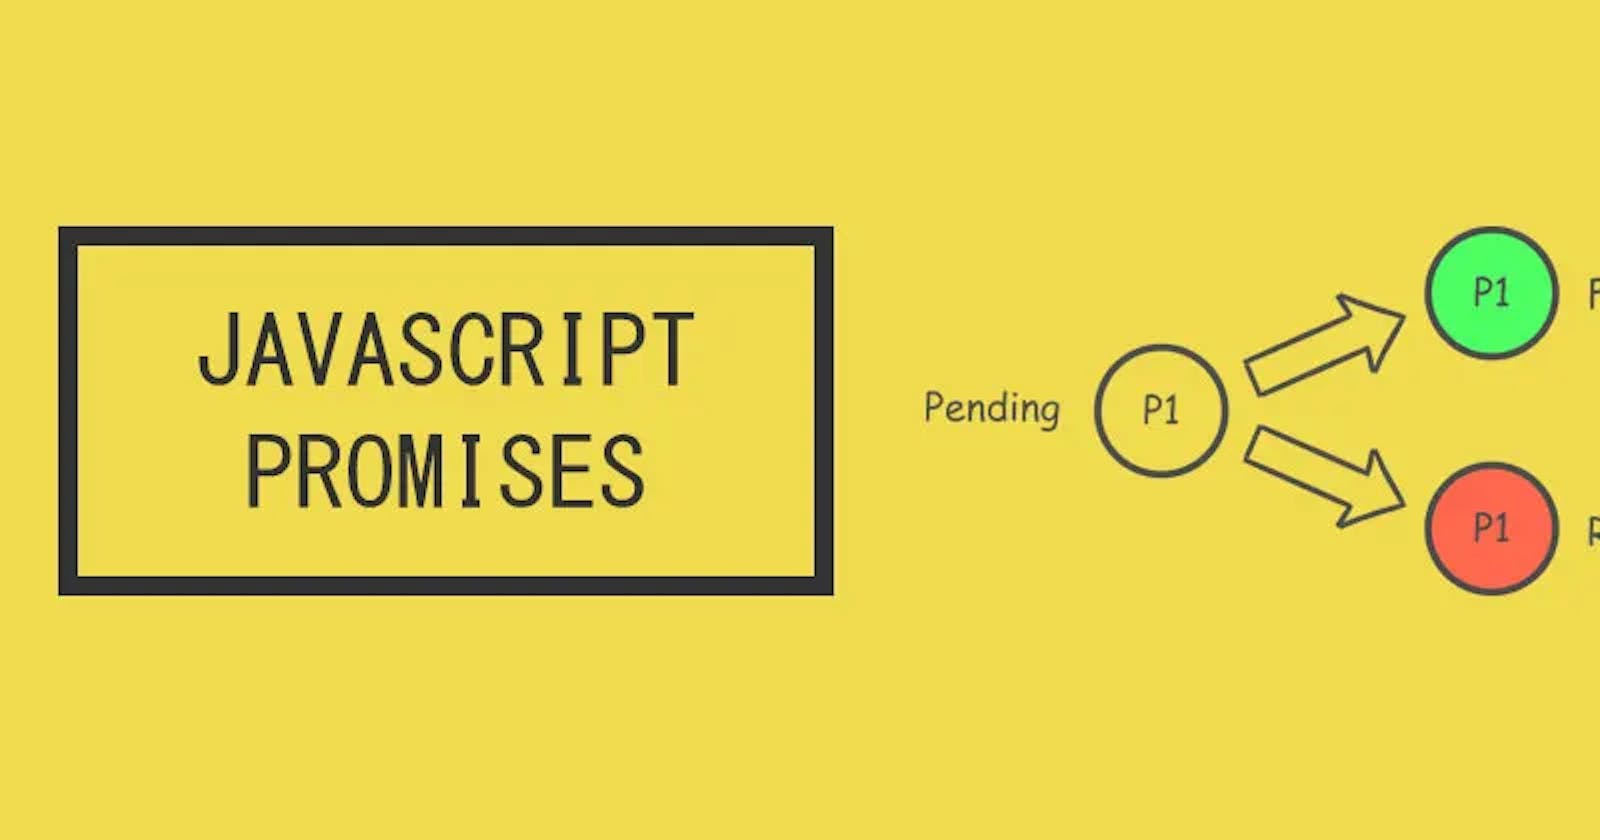 What is the Promise of Javascript and how to use it effectively?